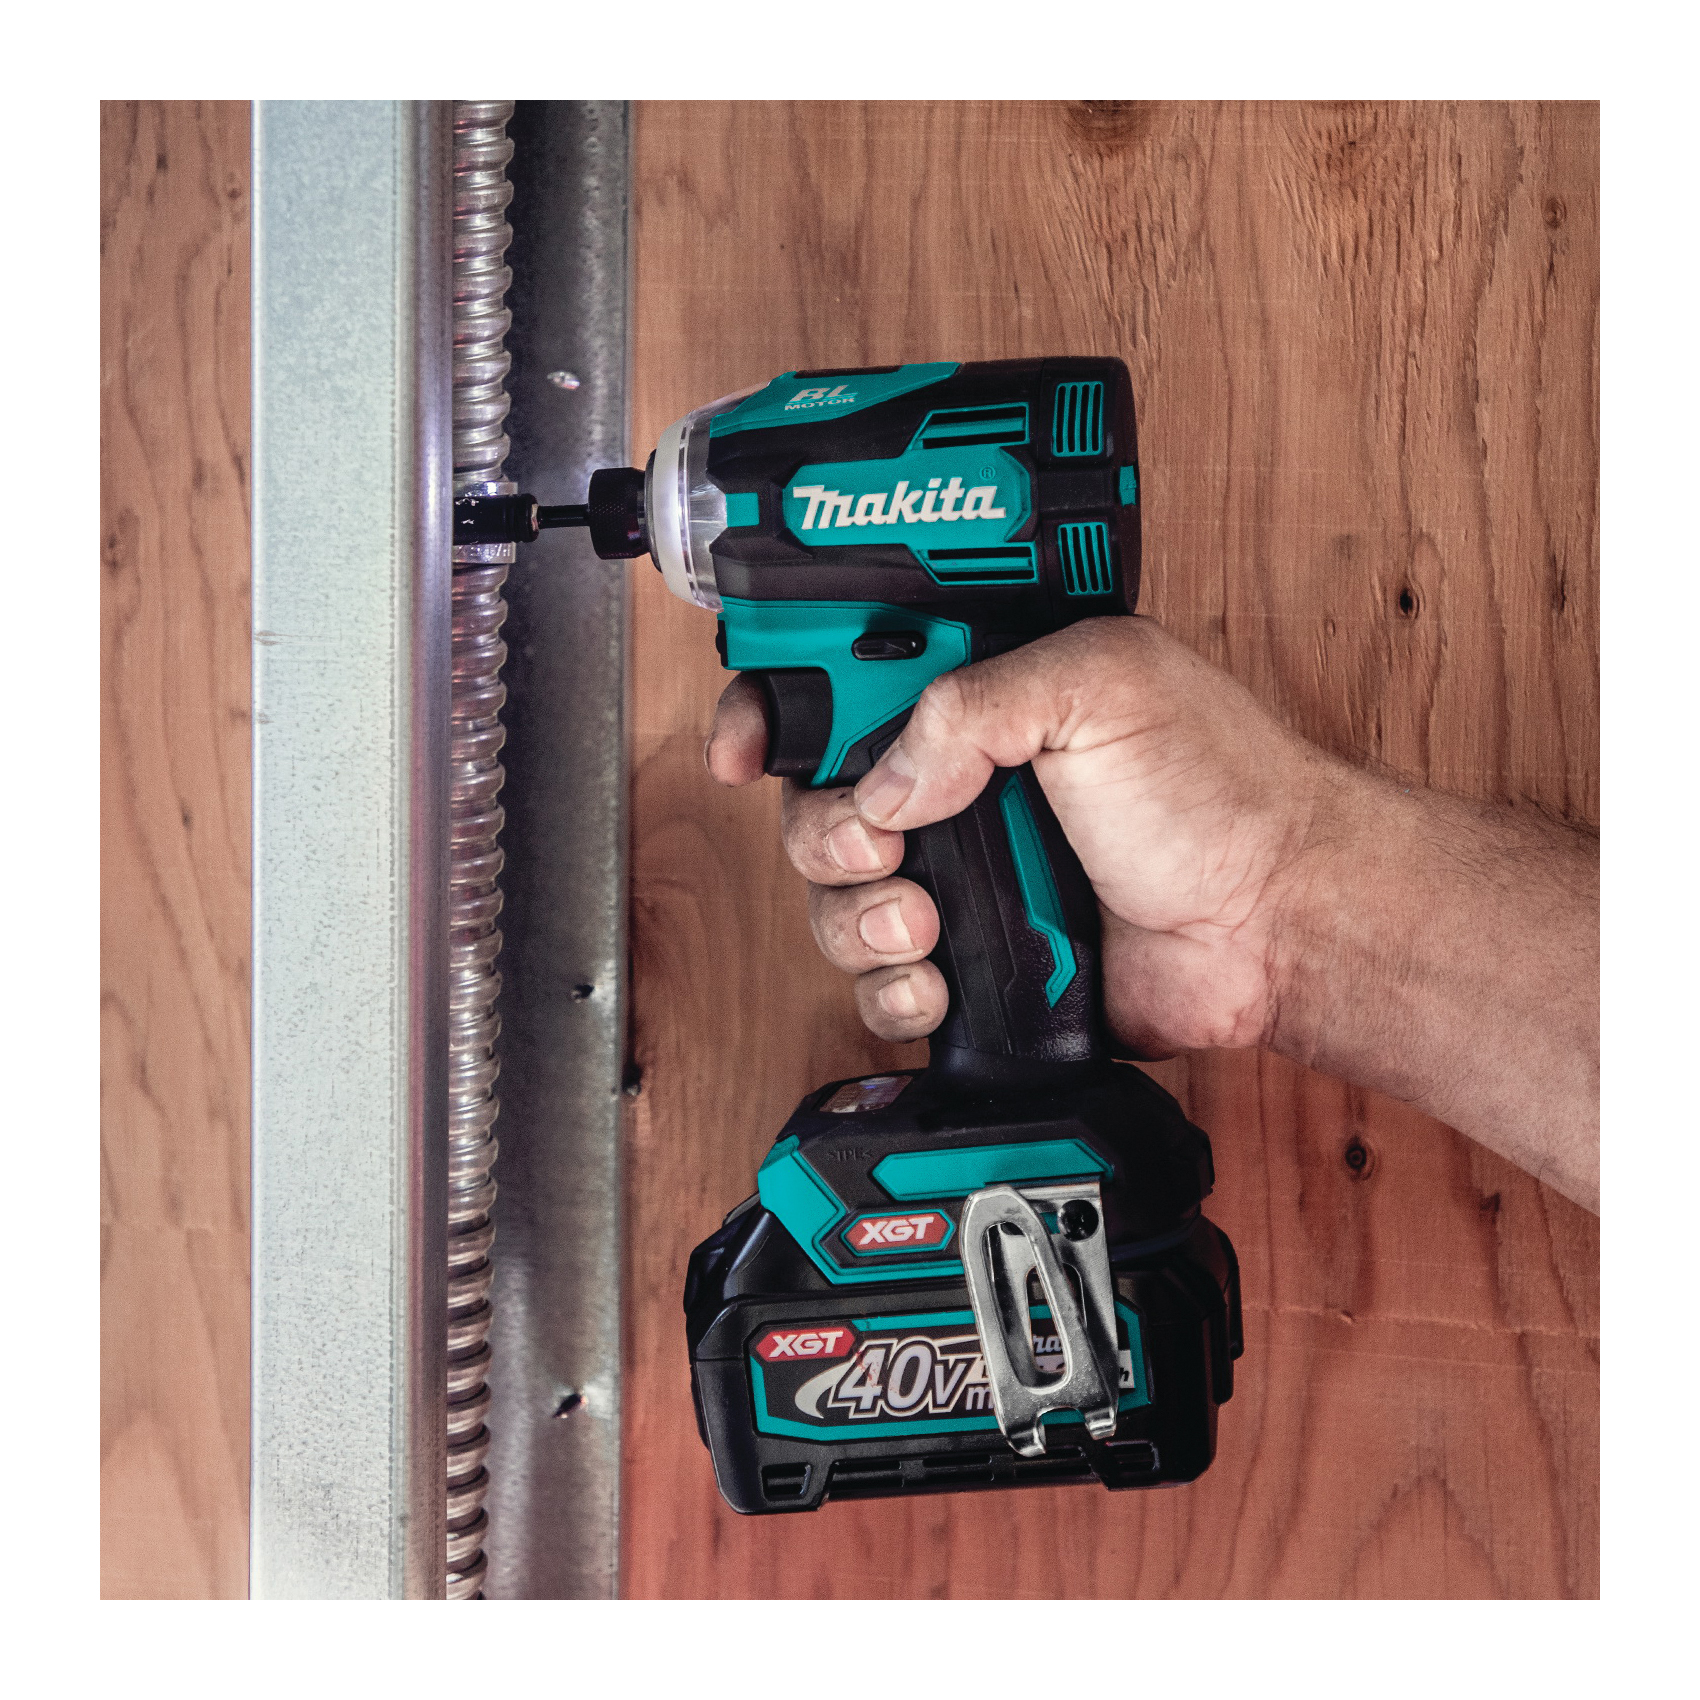 Makita XGT GDT01D Impact Driver Kit, Battery Included, 40 V, 2.5 Ah, 1/4 in Drive, Hex Drive - 5